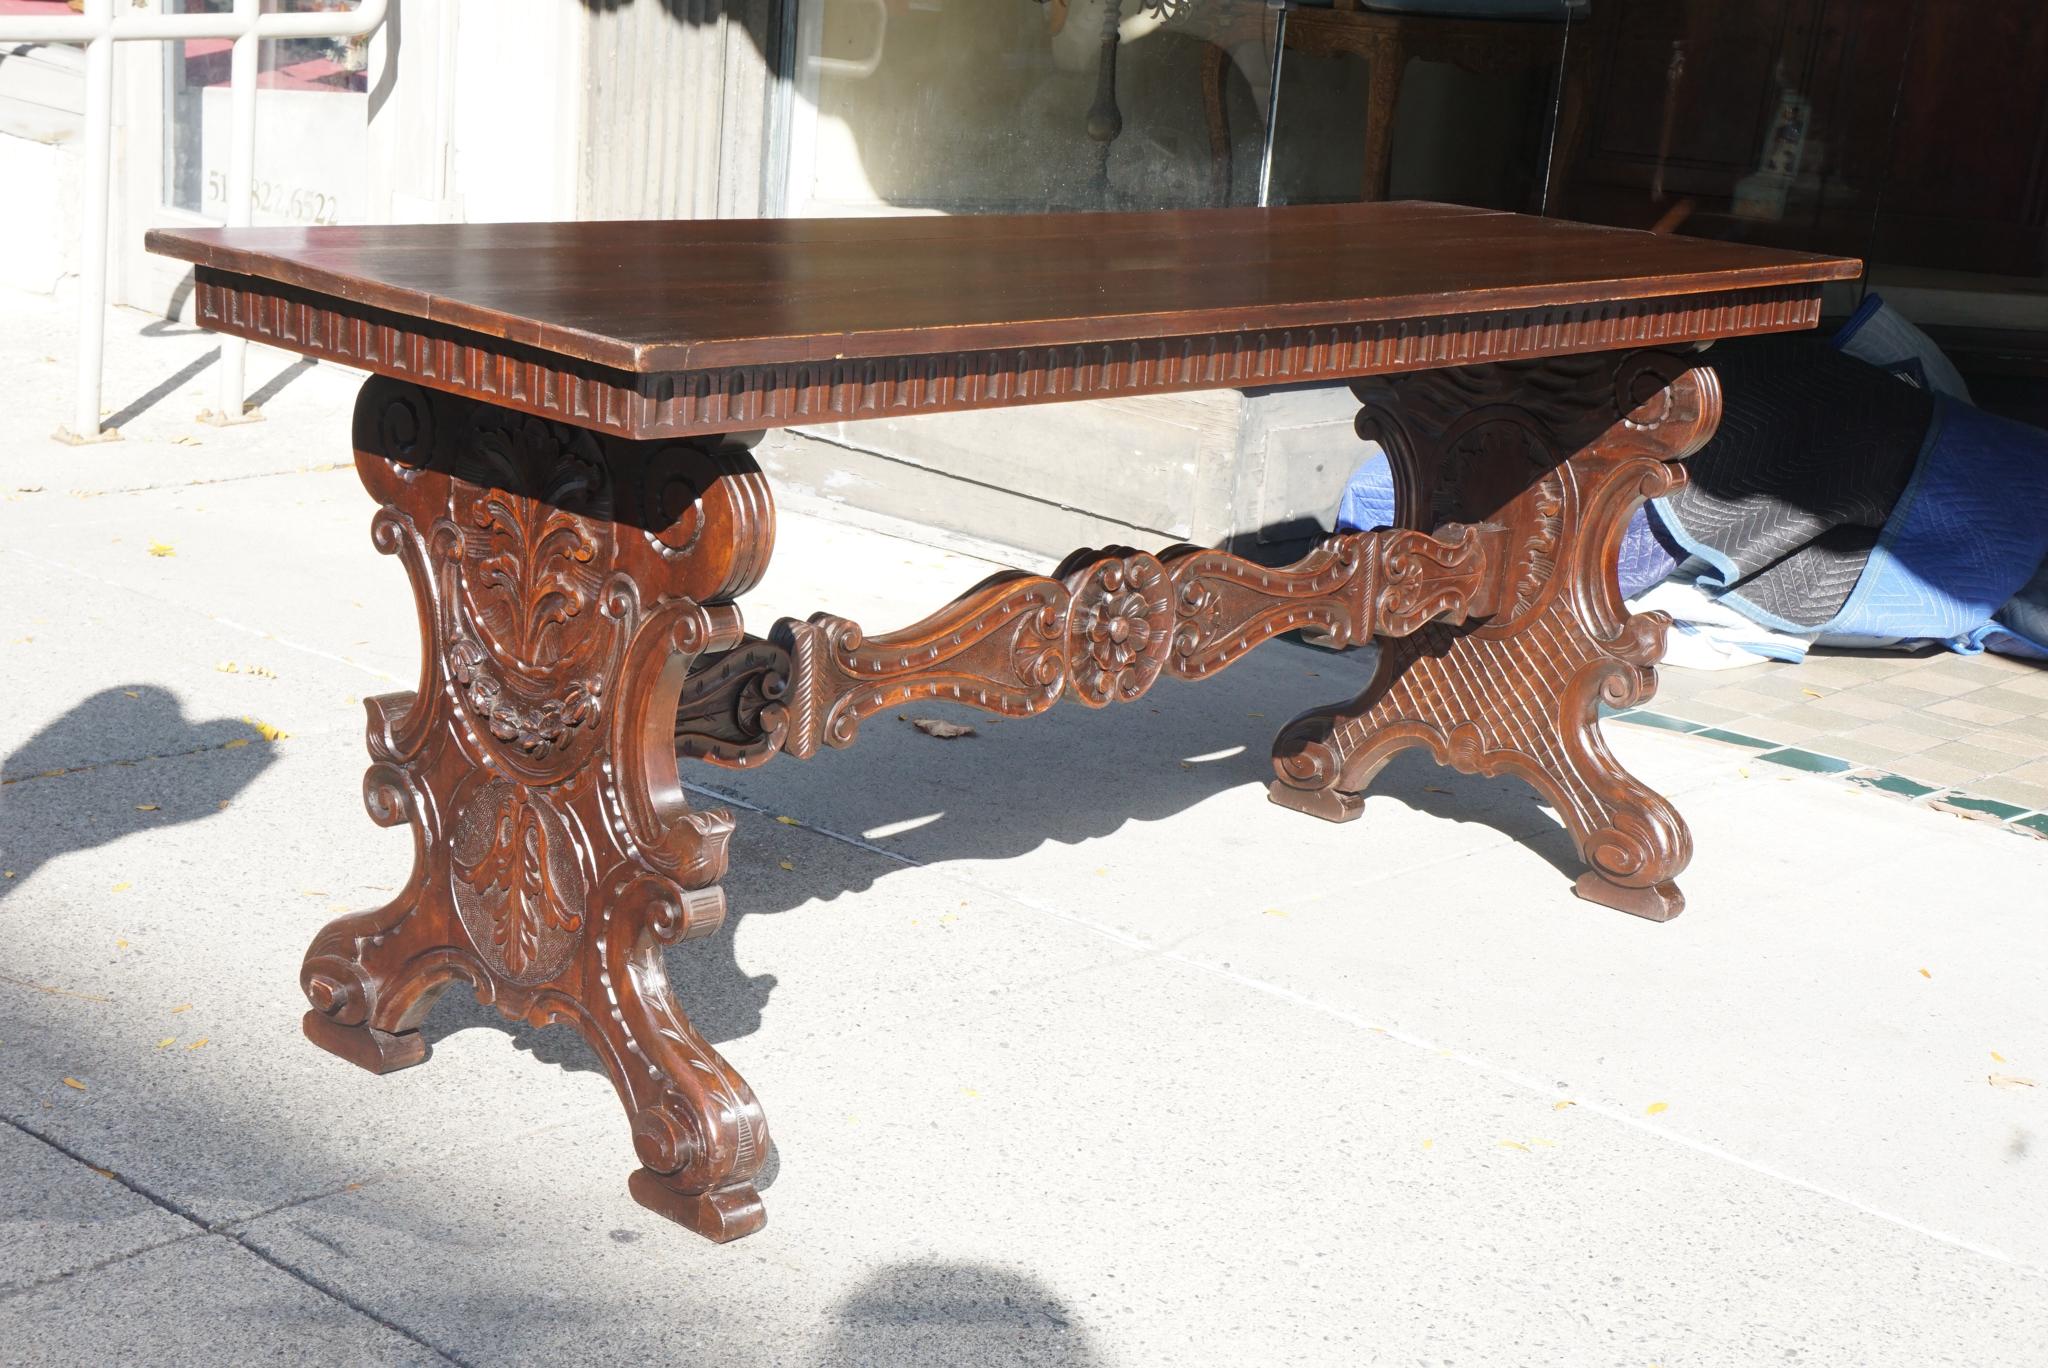 This table made in Italy circa 1900 from thick, heavily carved walnut is styled as a 17th century Florentine table. The plank board top is set upon an apron detailed with a running band of fluted carving. This then sets upon a pair of thick